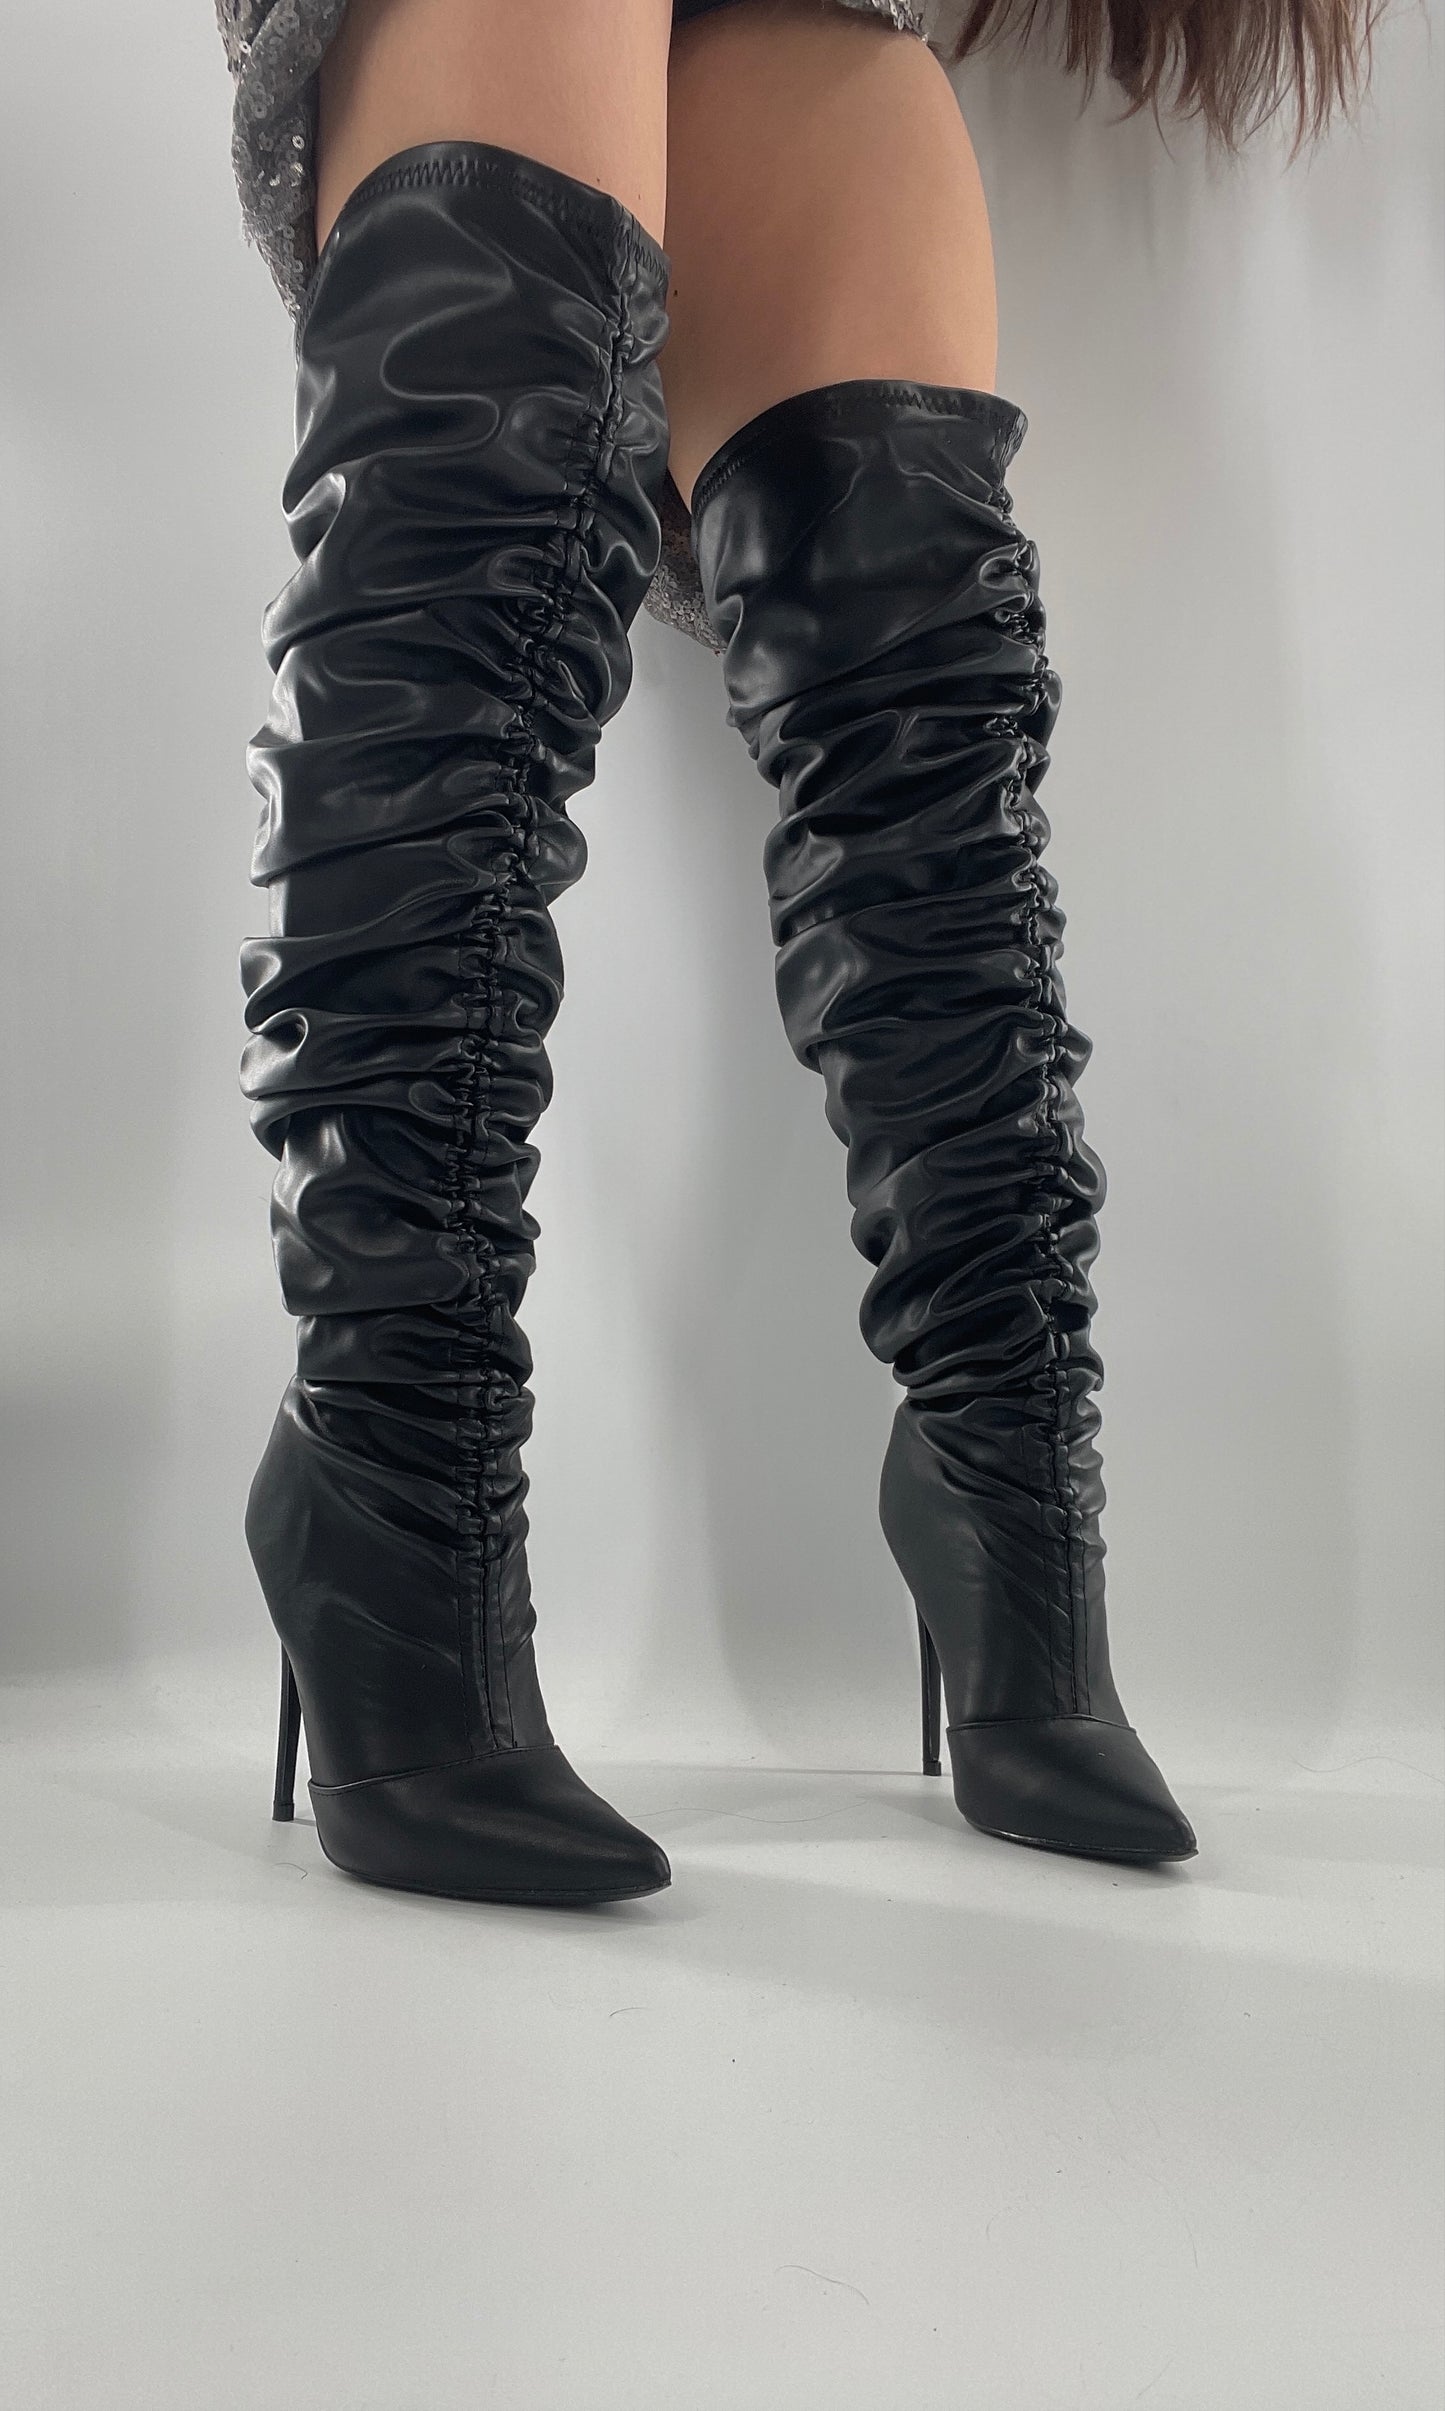 Unlabeled Black Vegan Leather Thigh High Scrunch Boots (8)